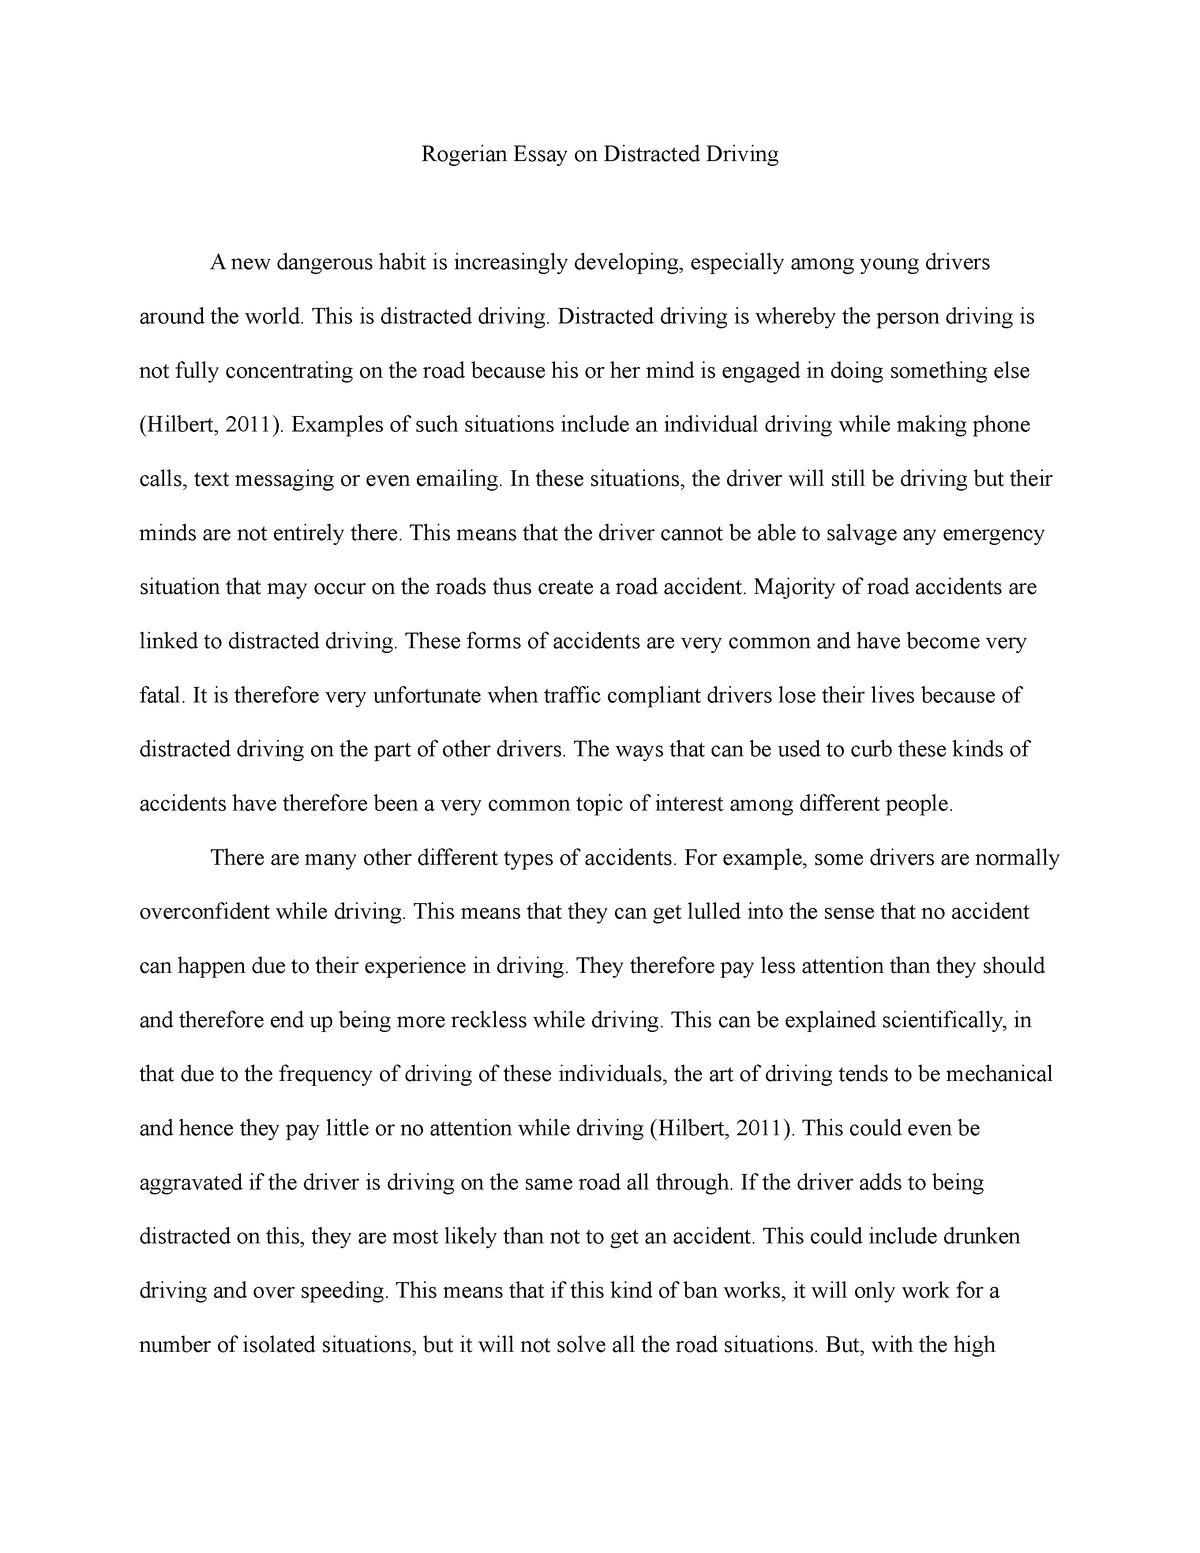 distracted driving essay